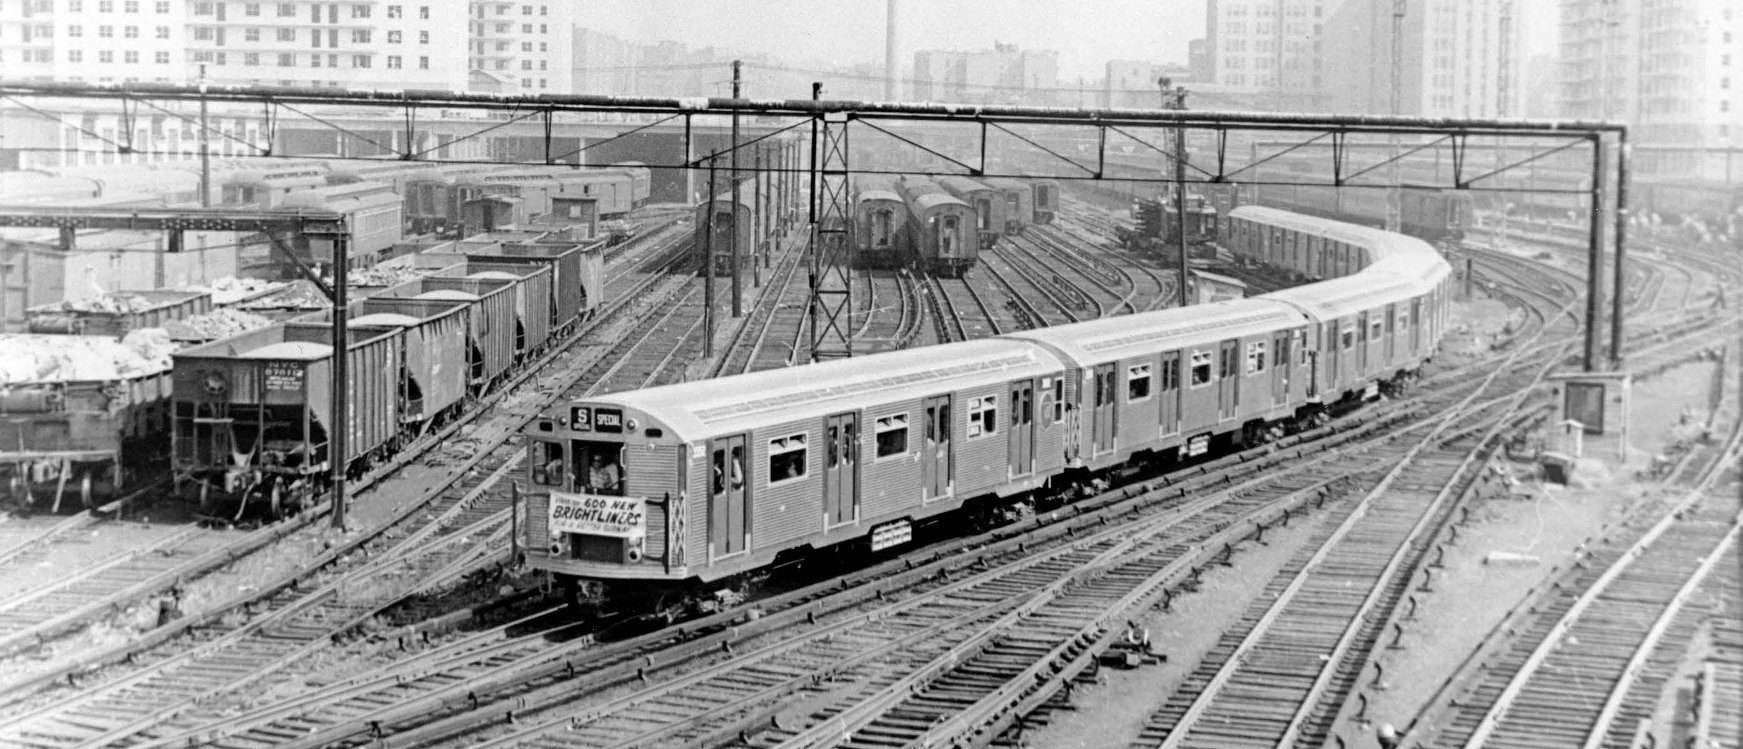 R-32 Train on Ceremonial First Trip in 1964